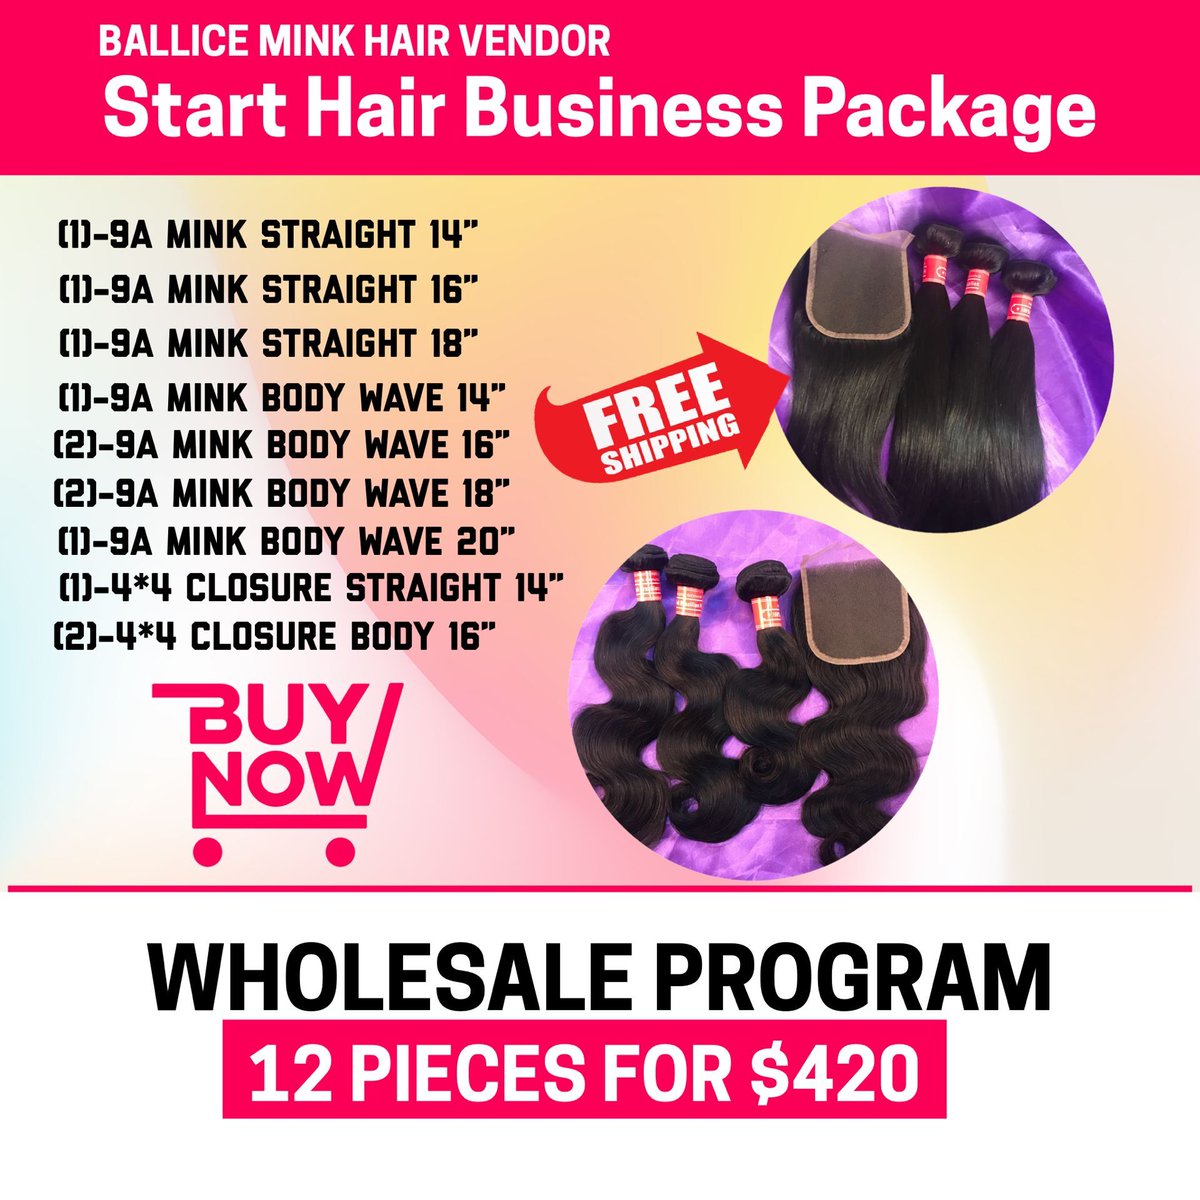 Start Hair Business Package -$420 For 12 Pieces
goo.gl/ywVR8i
#starthairbusiness #hairbusiness #virginhair #minkhairvendor